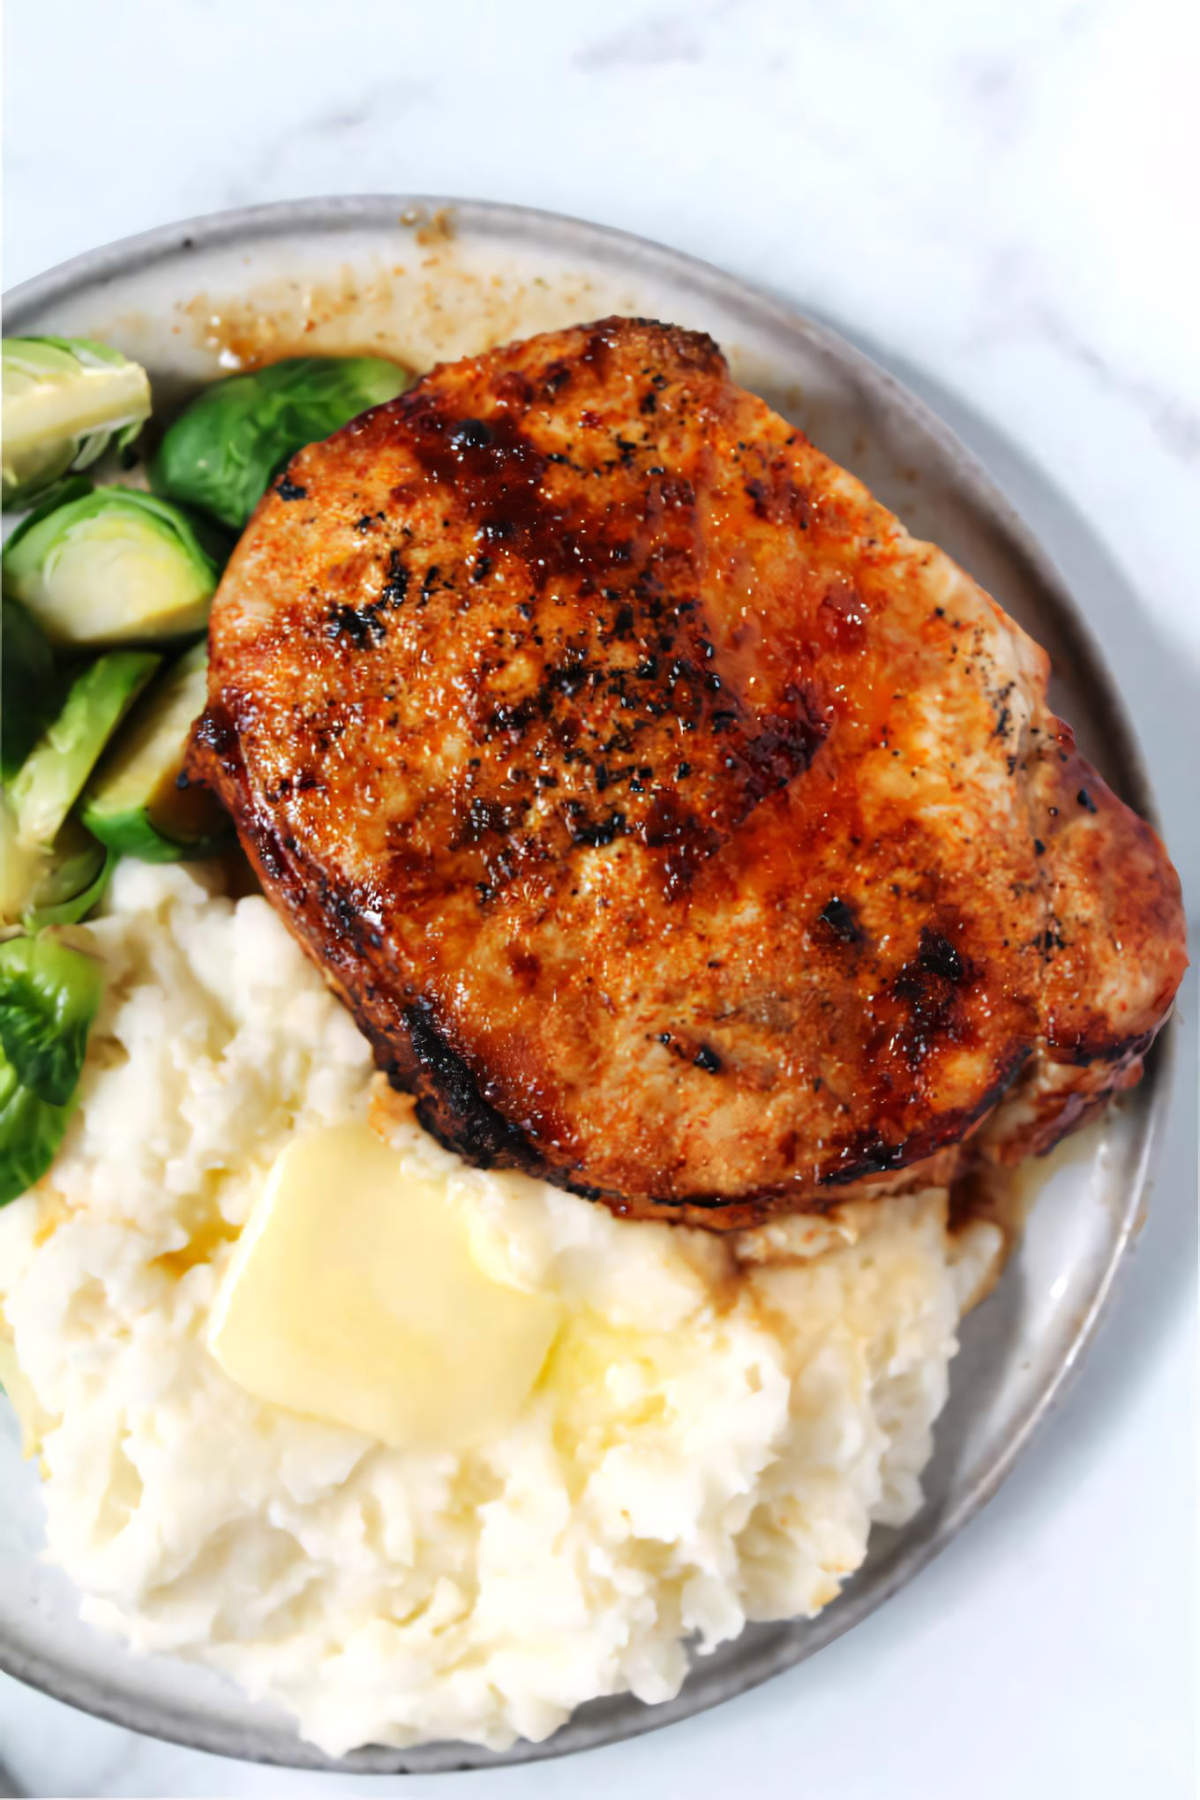 Chipotle crusted pork chop plated with mashed potatoes and Brussels sprouts.